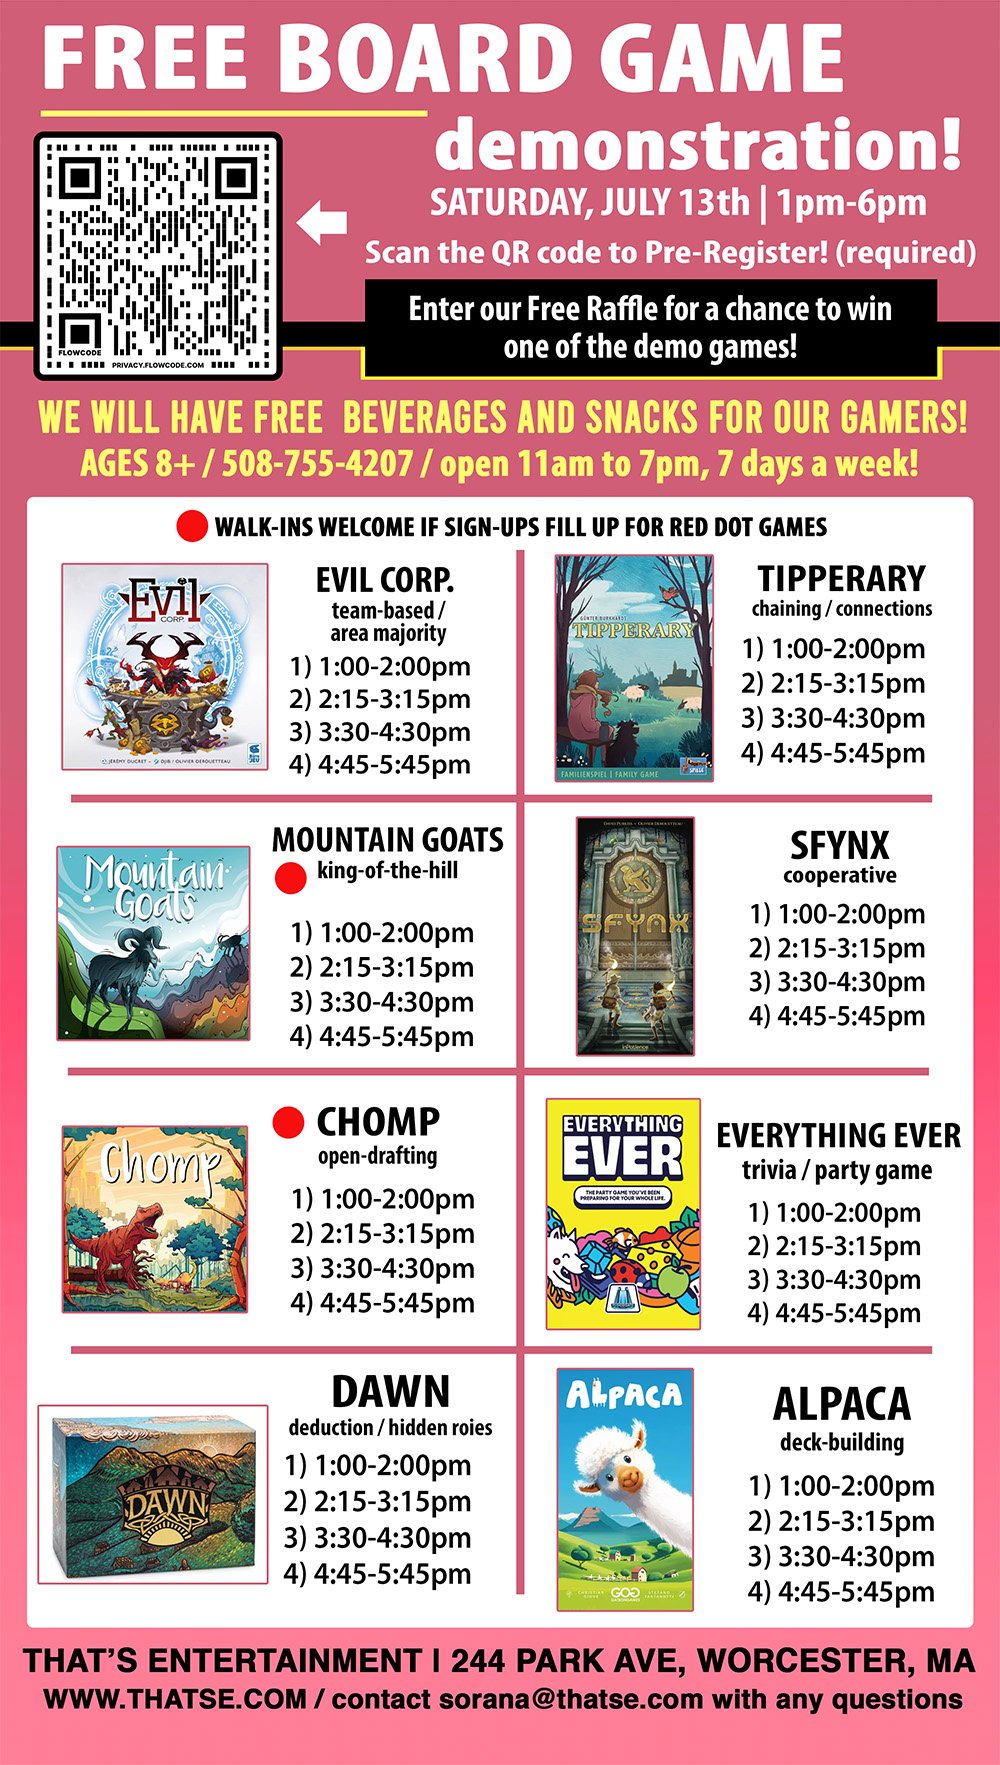 FREE BOARD GAME DEMO-Saturday, July 13th (Worcester Store)